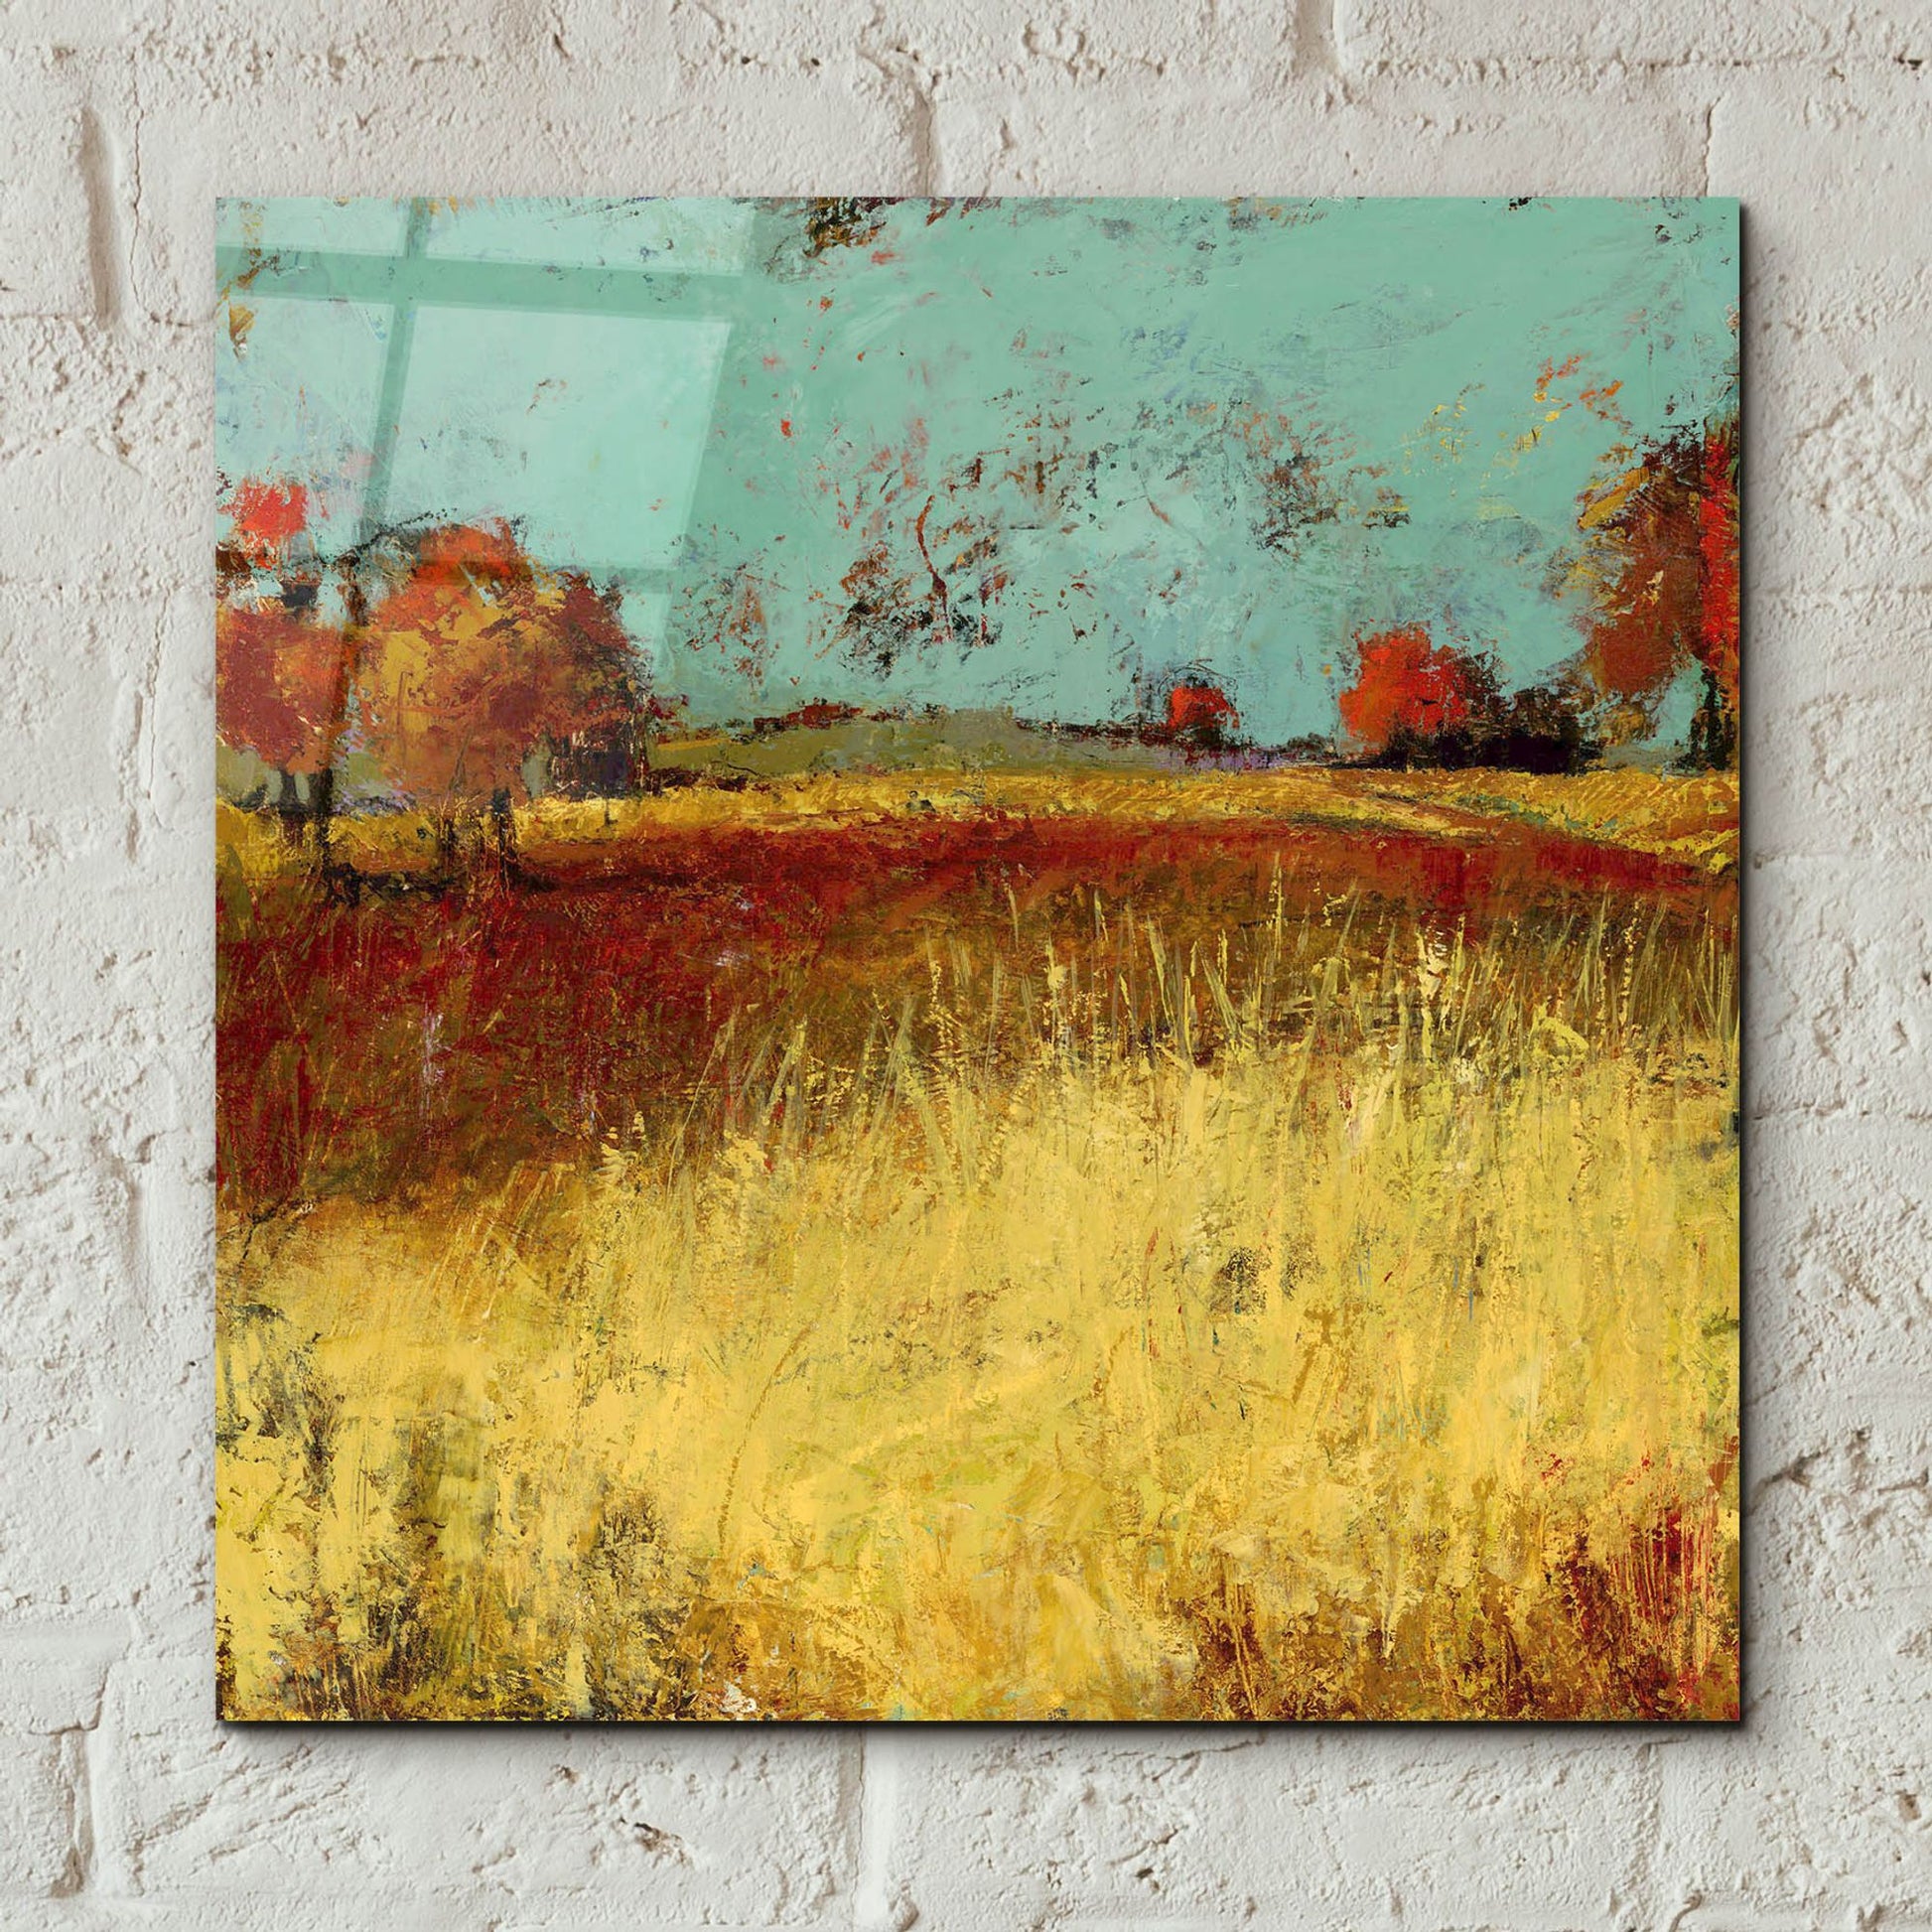 Epic Art 'Country Side No 2' by Linda Nickell, Acrylic Glass Wall Art,12x12